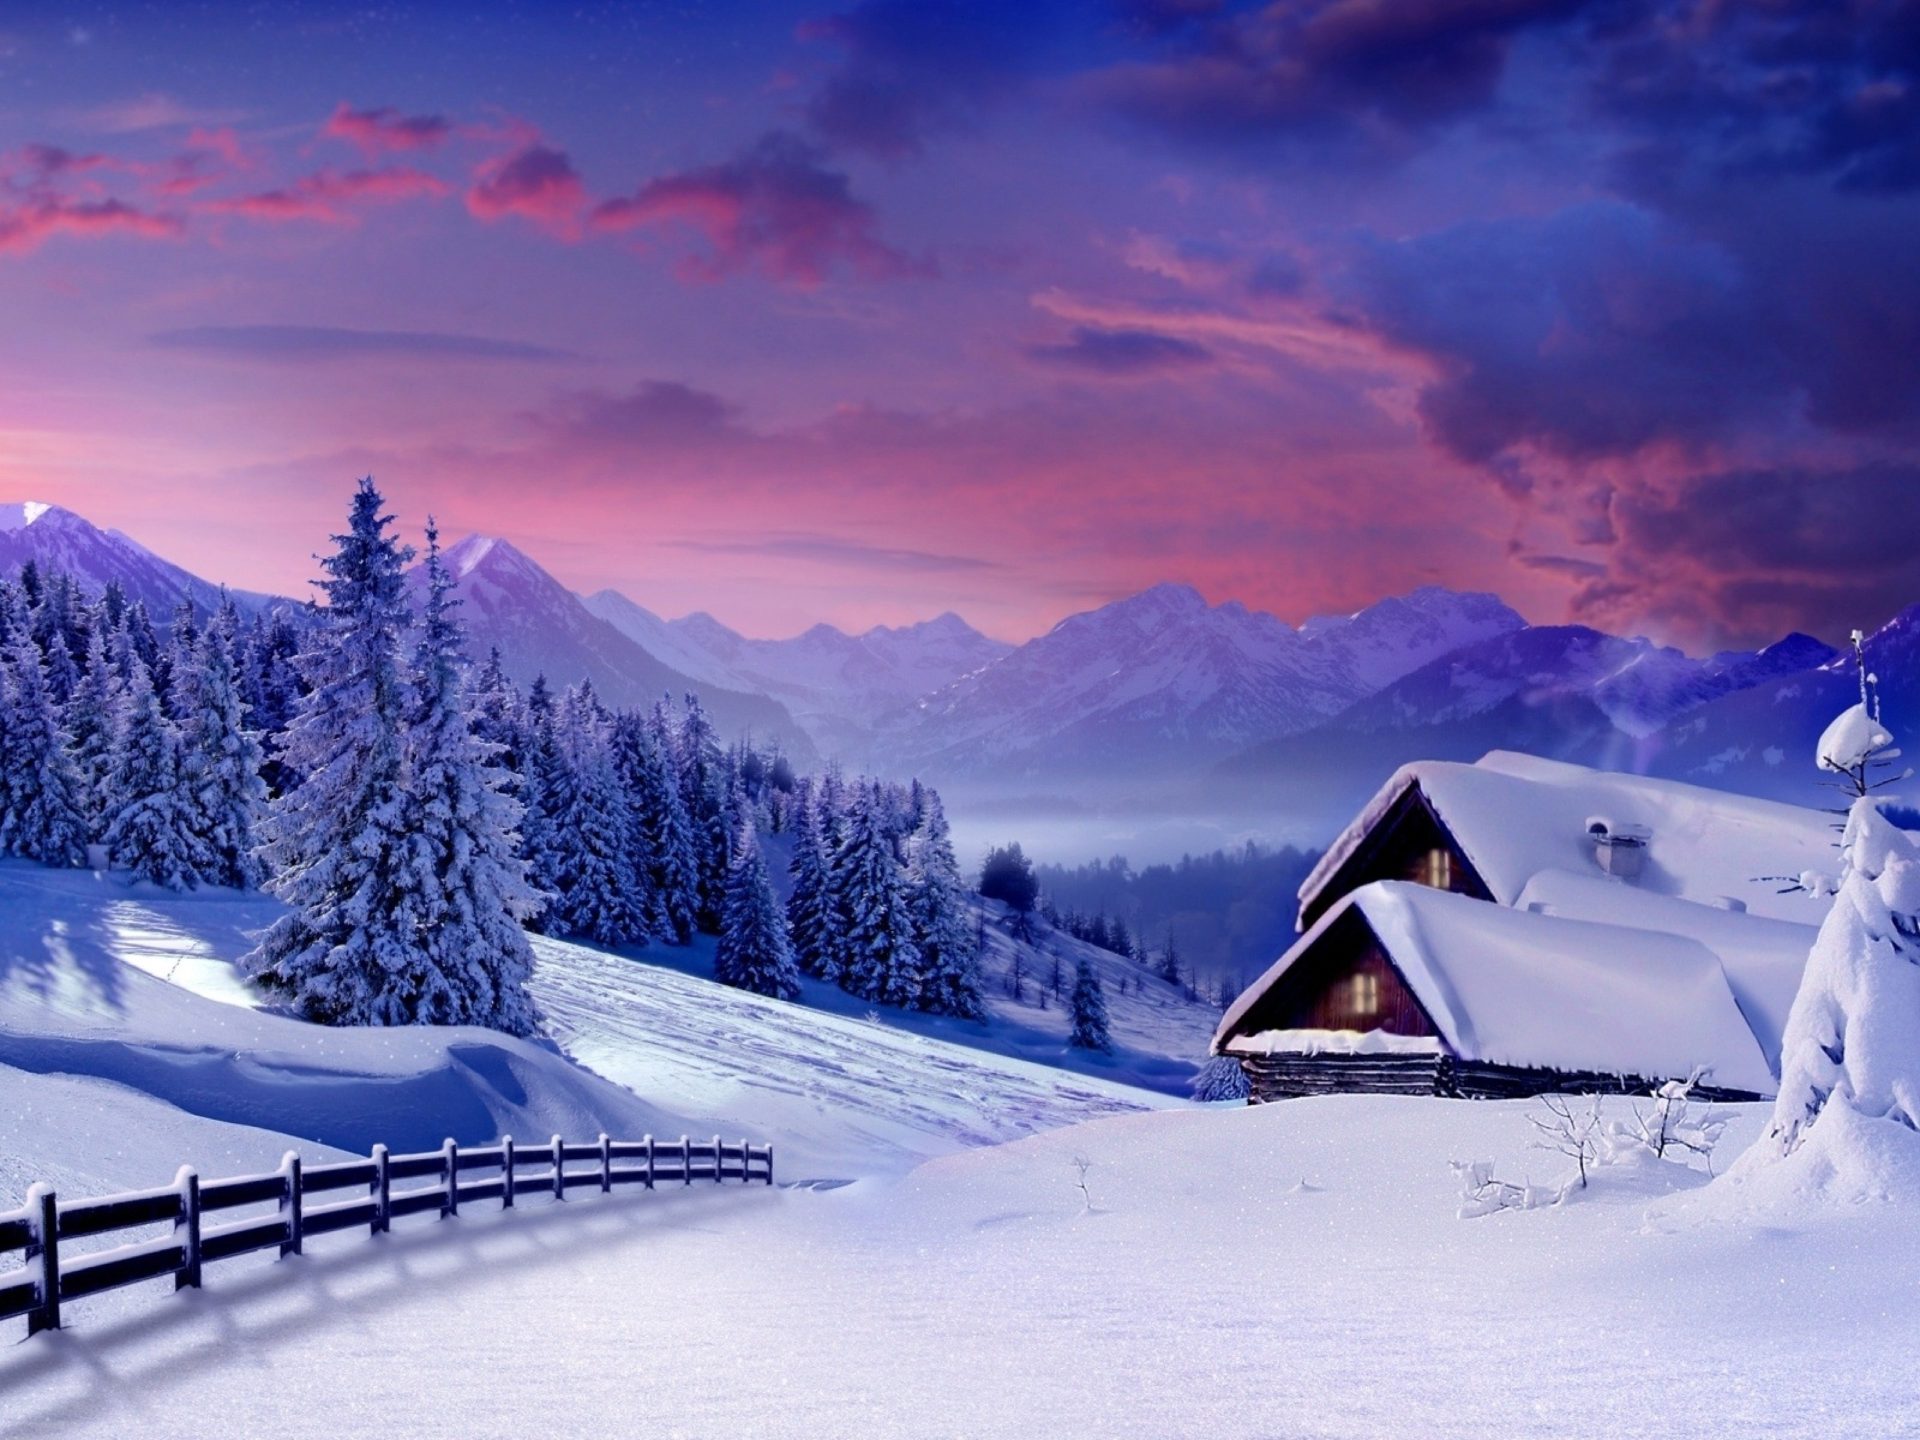 Forest Snowy Winter Mountains Wallpapers